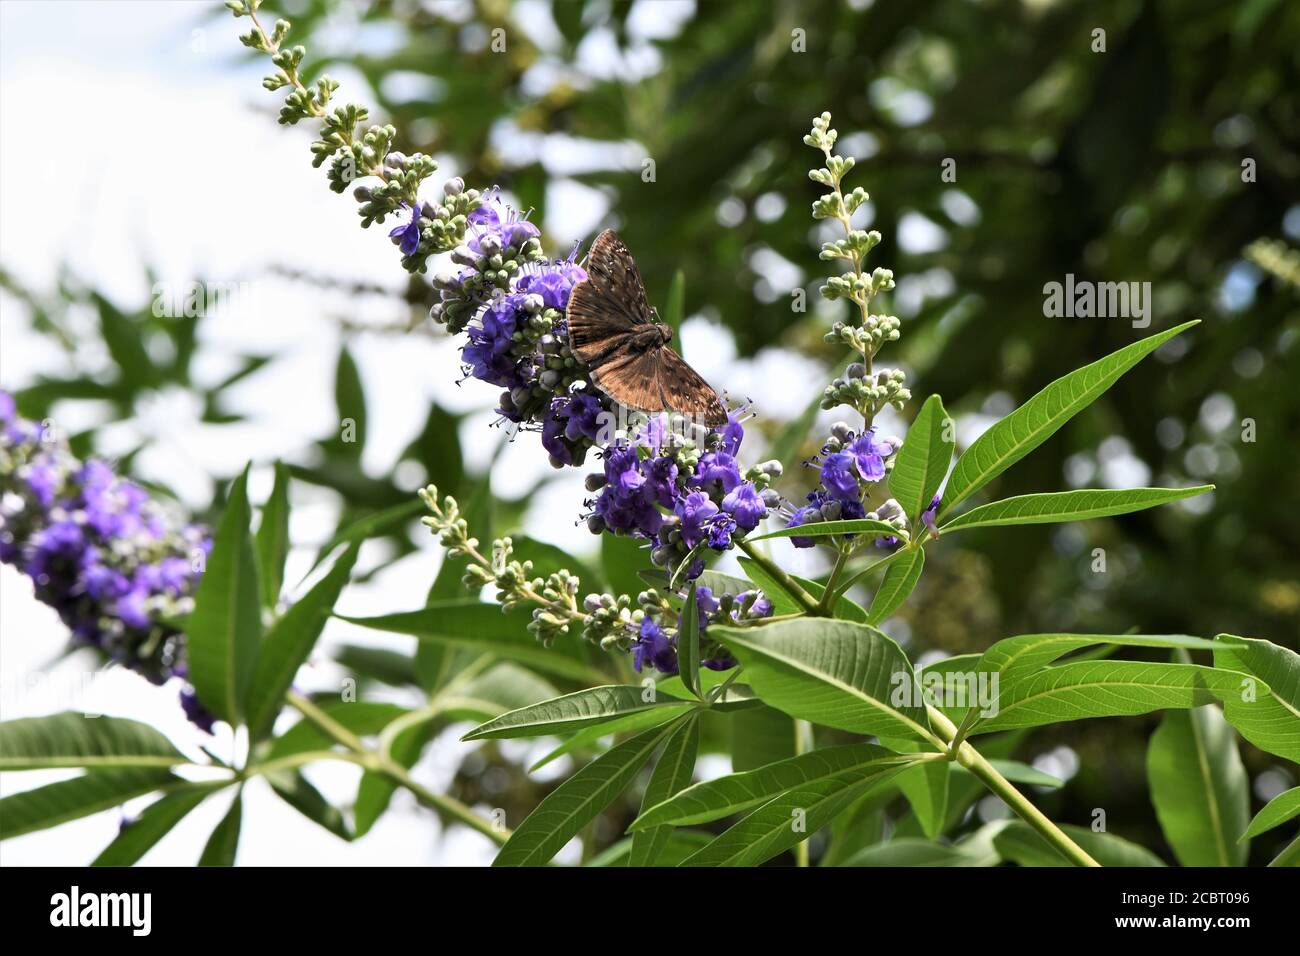 A brown butterfly spreading it's wings on a wisteria bush. Stock Photo